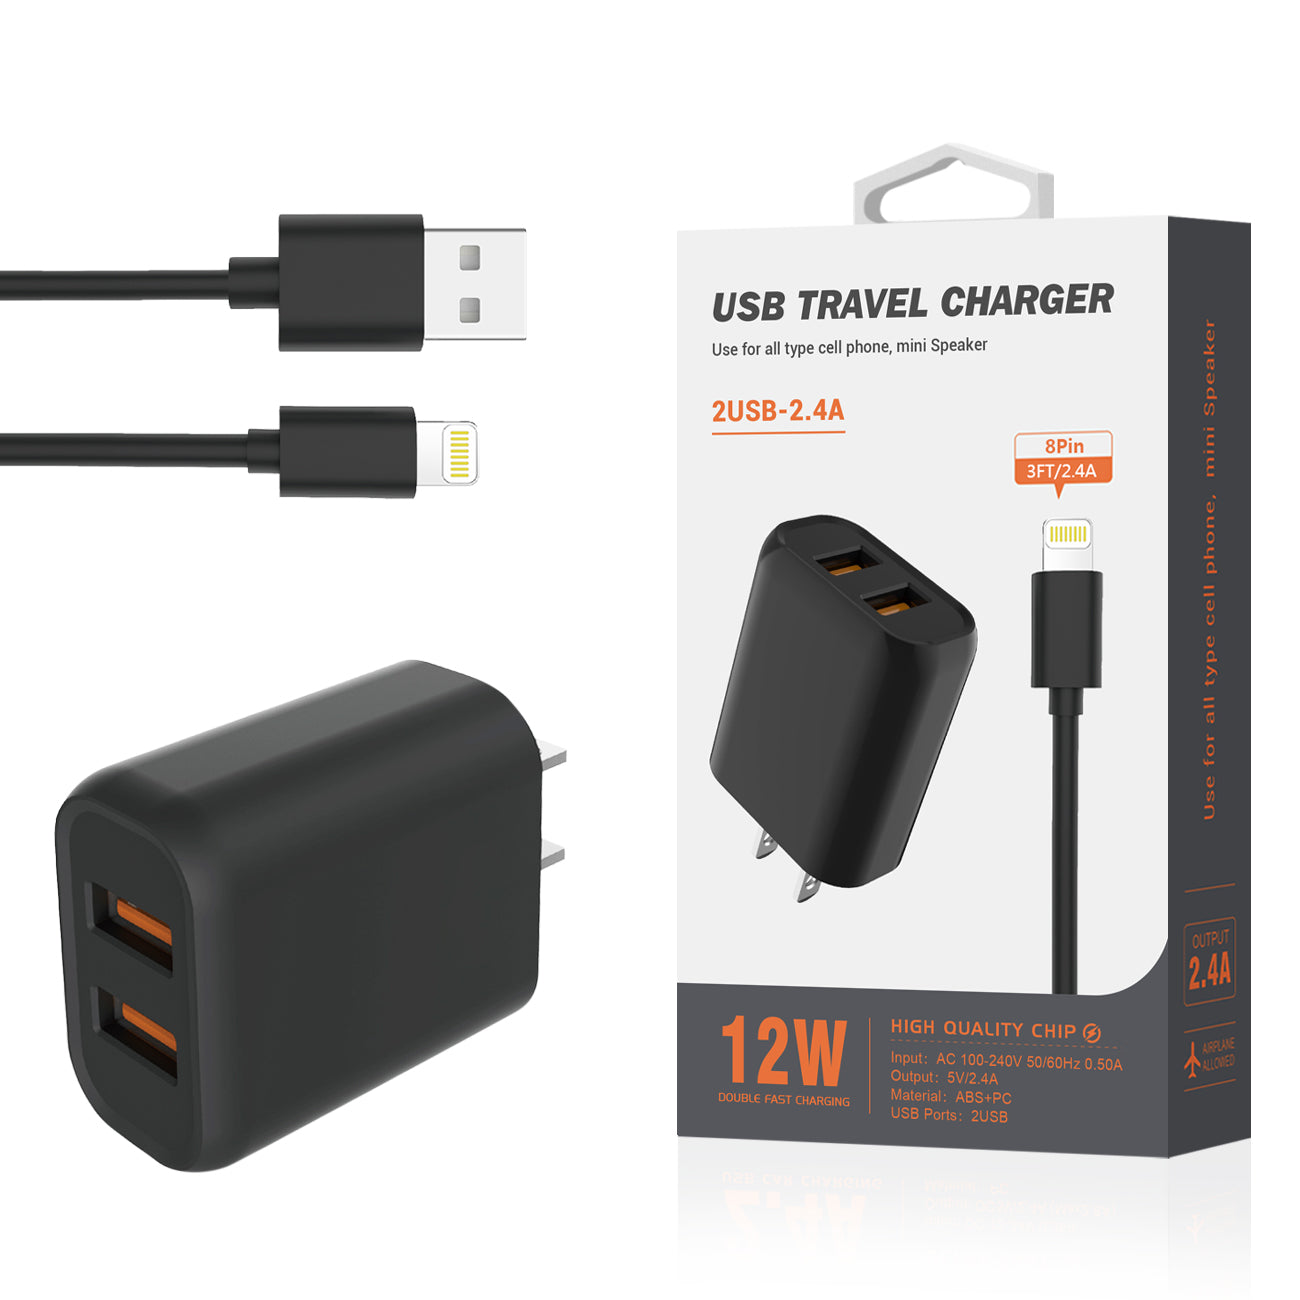 Travel Home Charger With Built In Cable 5 Ft 8 PIN Portable Black Color